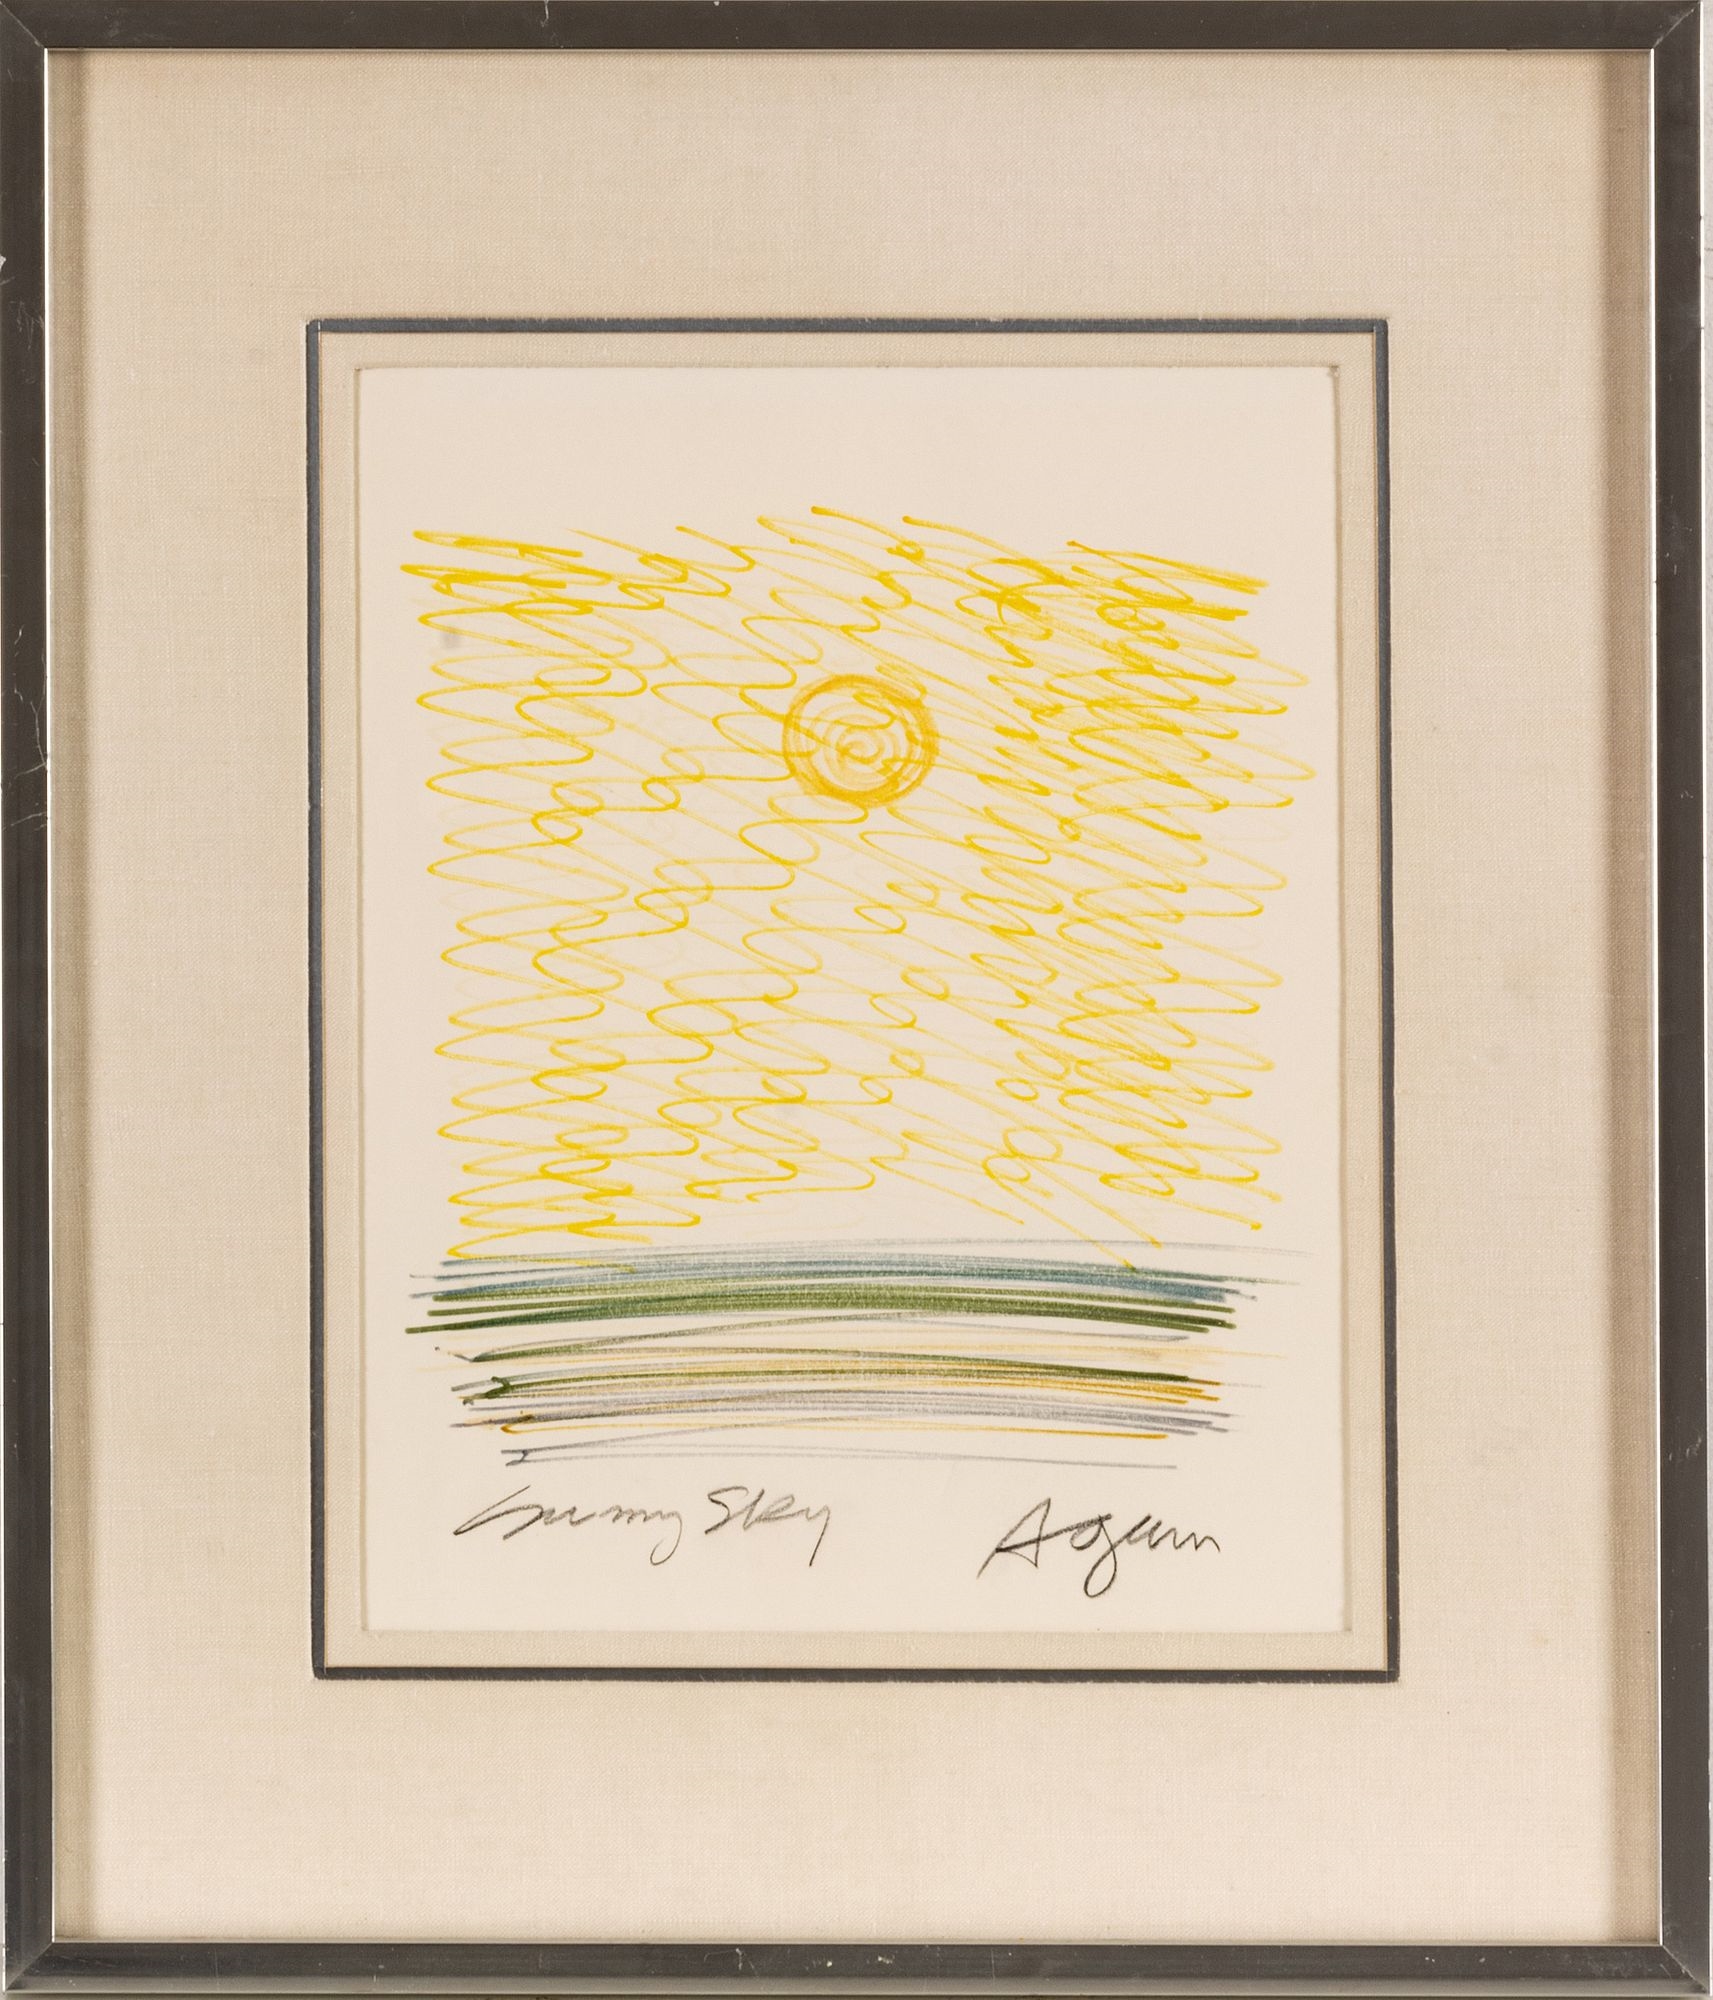 Yaacov Agam (Israeli, 1928) Colored Drawing On Paper, "Sunny Sky", H 10.5'' W 9.75''